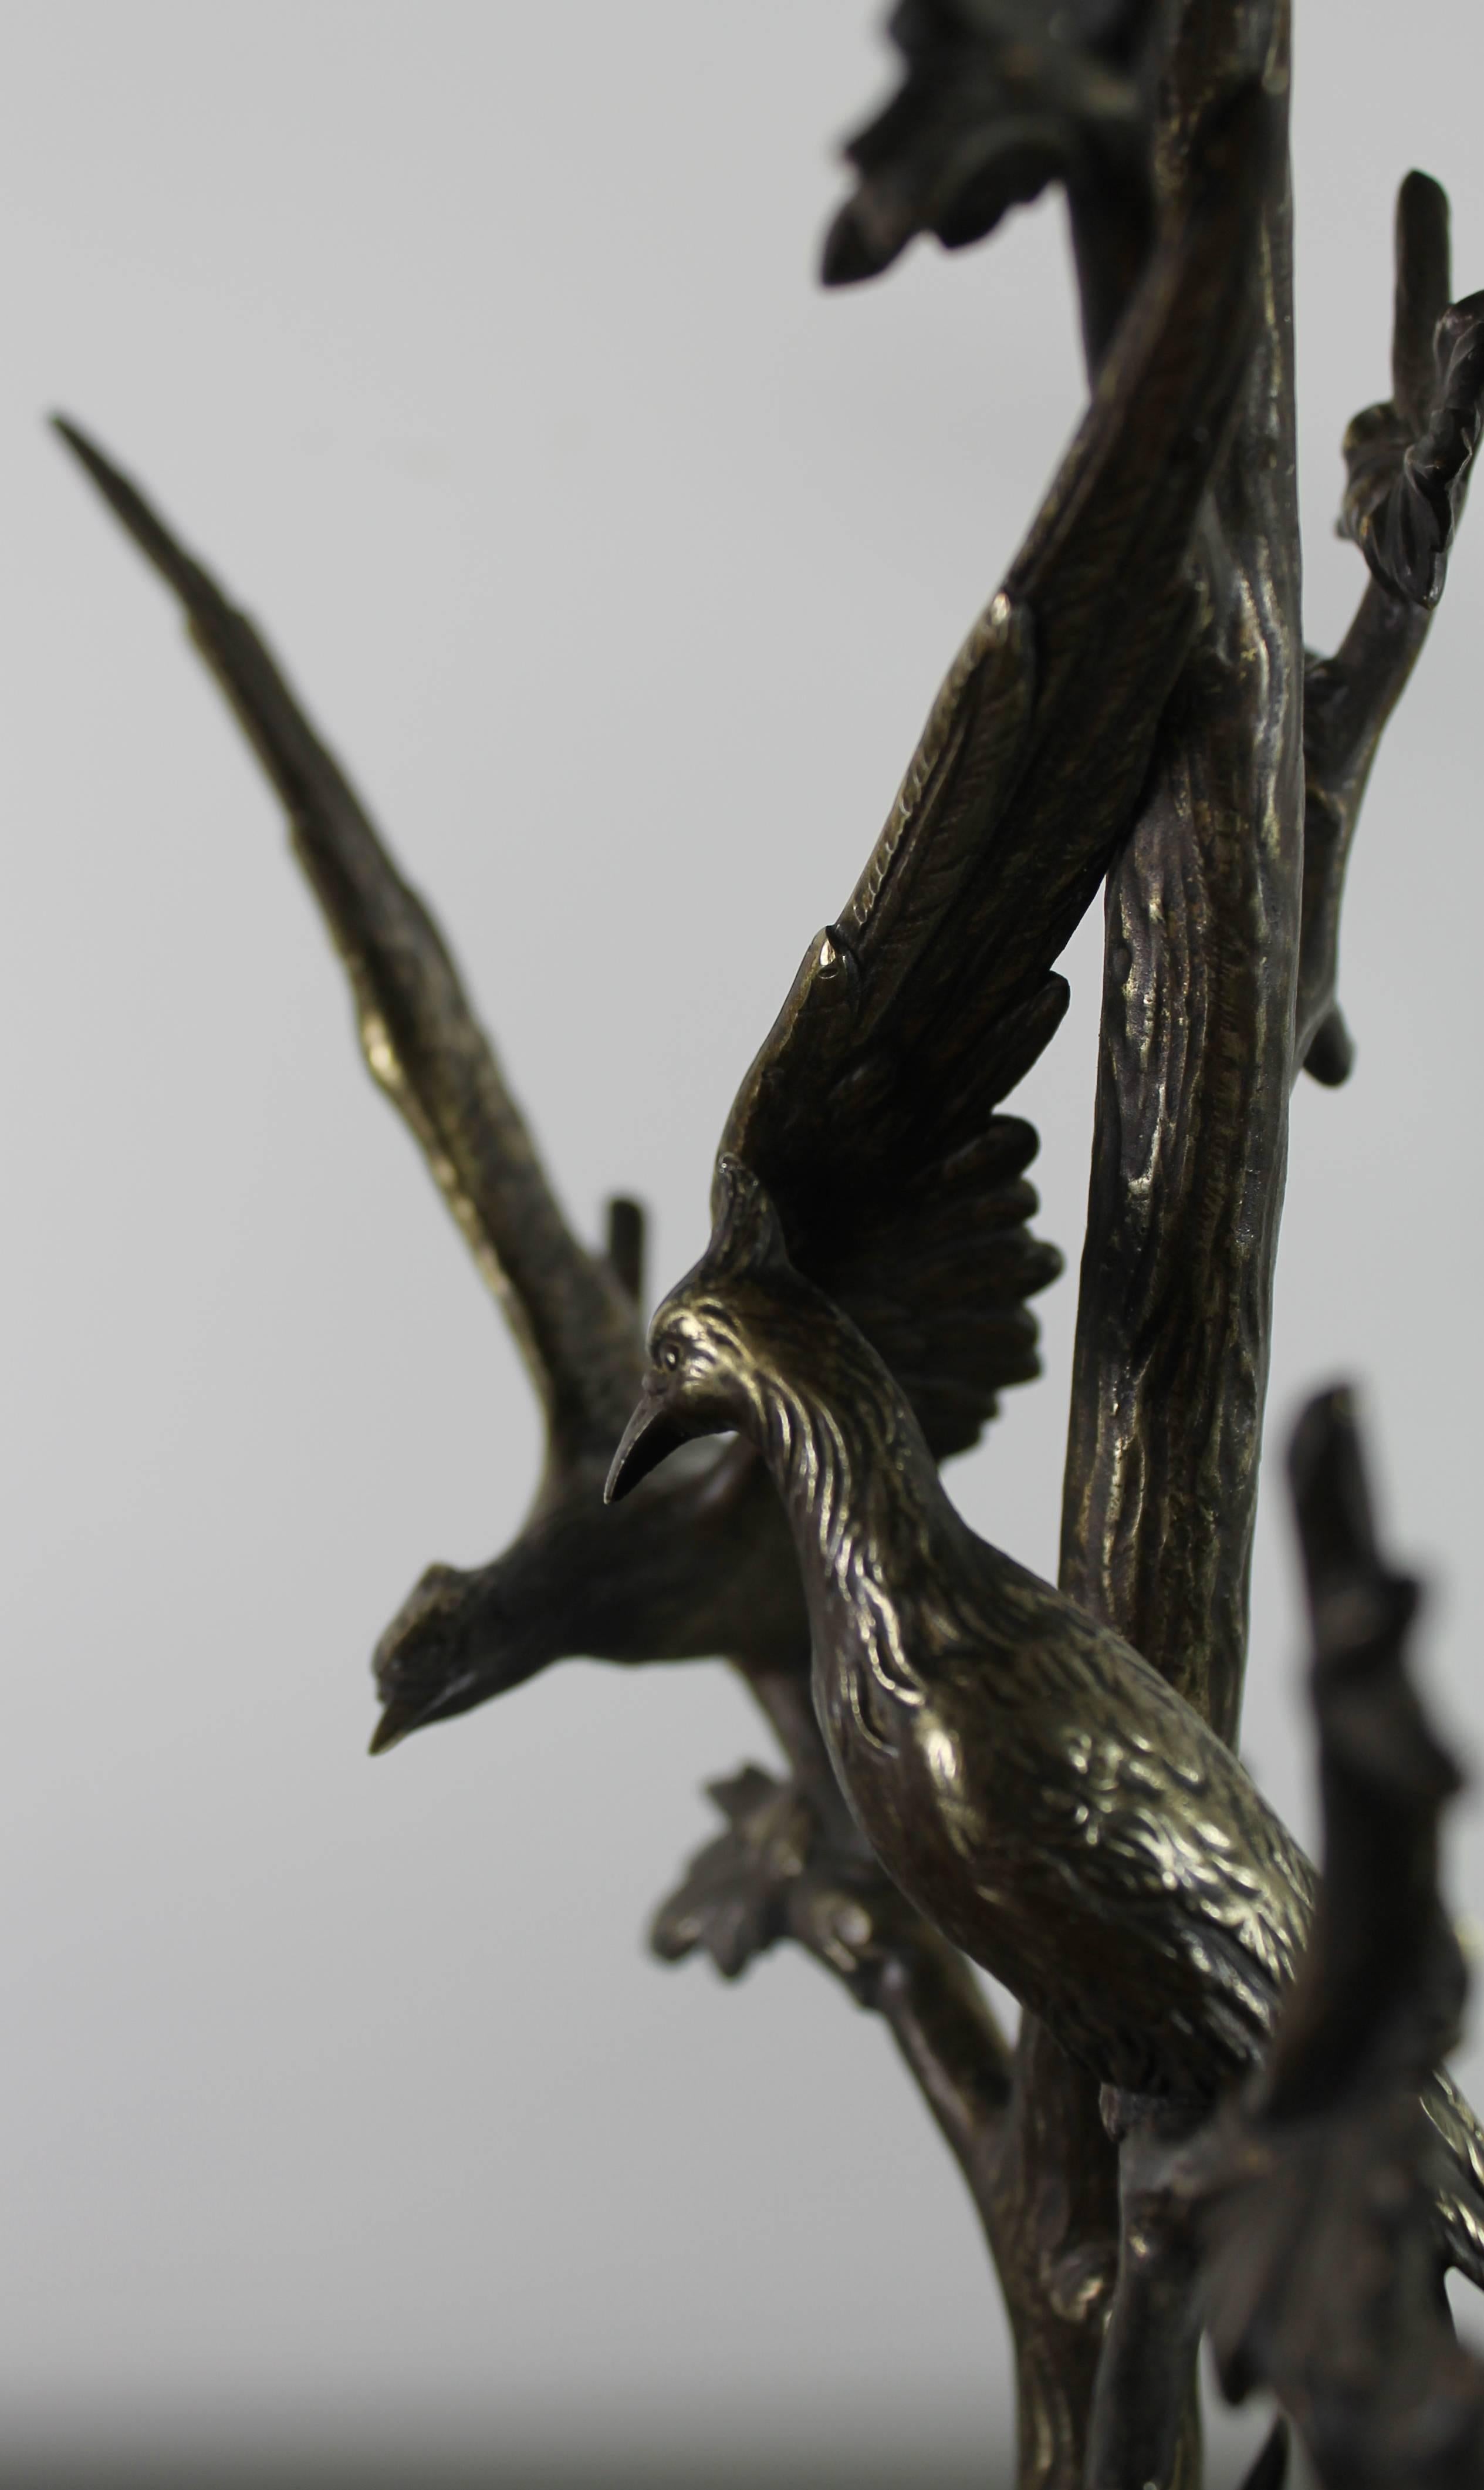 Table lamp in bronze with two birds in a tree, on a marble base.